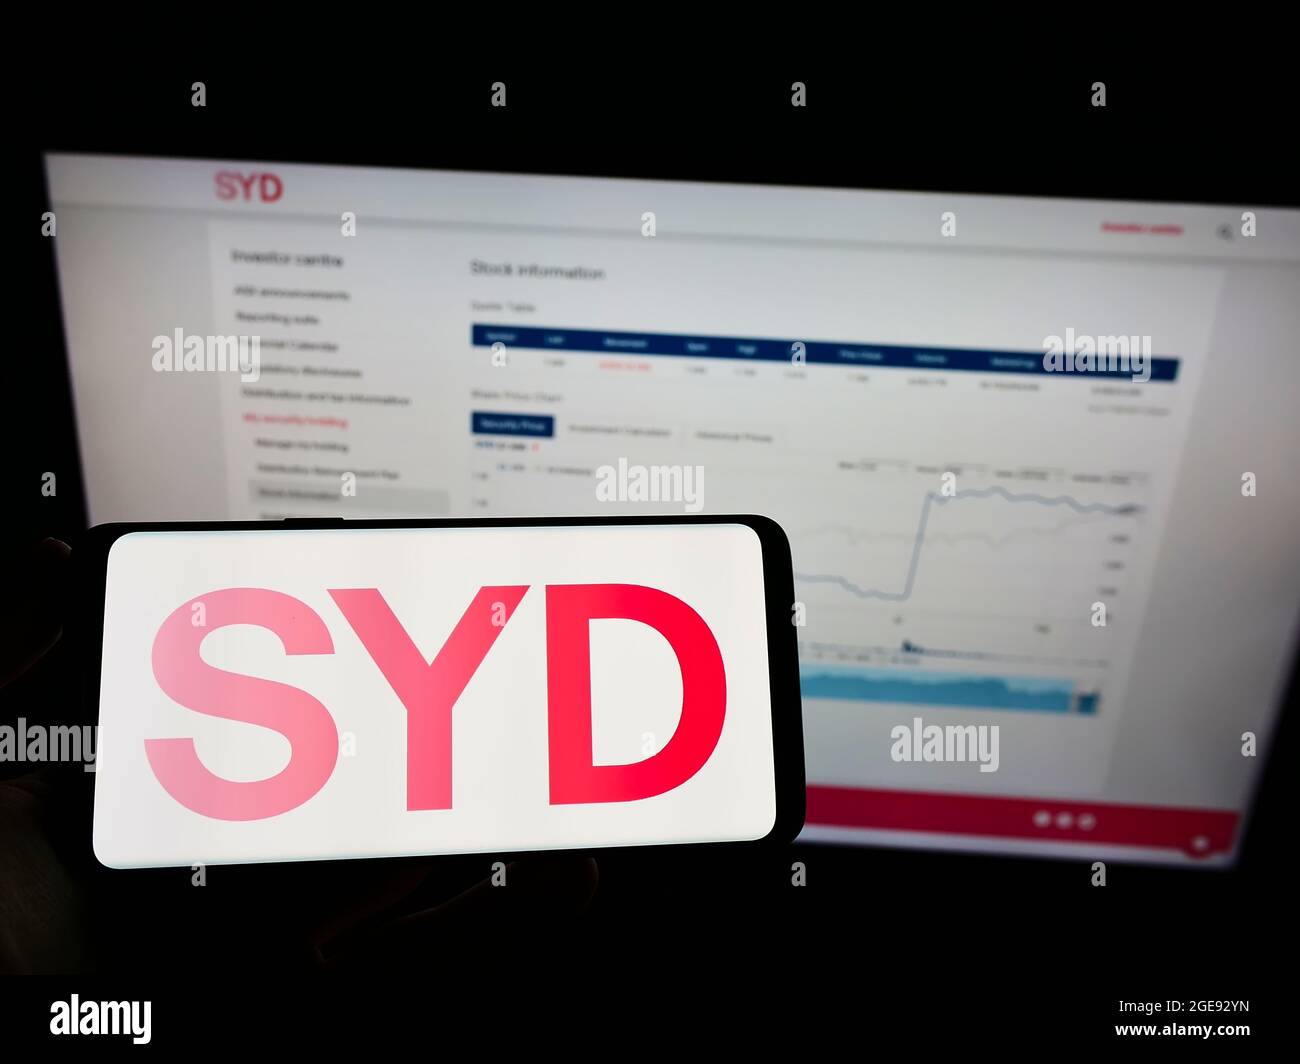 Person holding mobile phone with logo of Australian company Sydney Airport Holdings Pty Ltd on screen in front of web page. Focus on phone display. Stock Photo